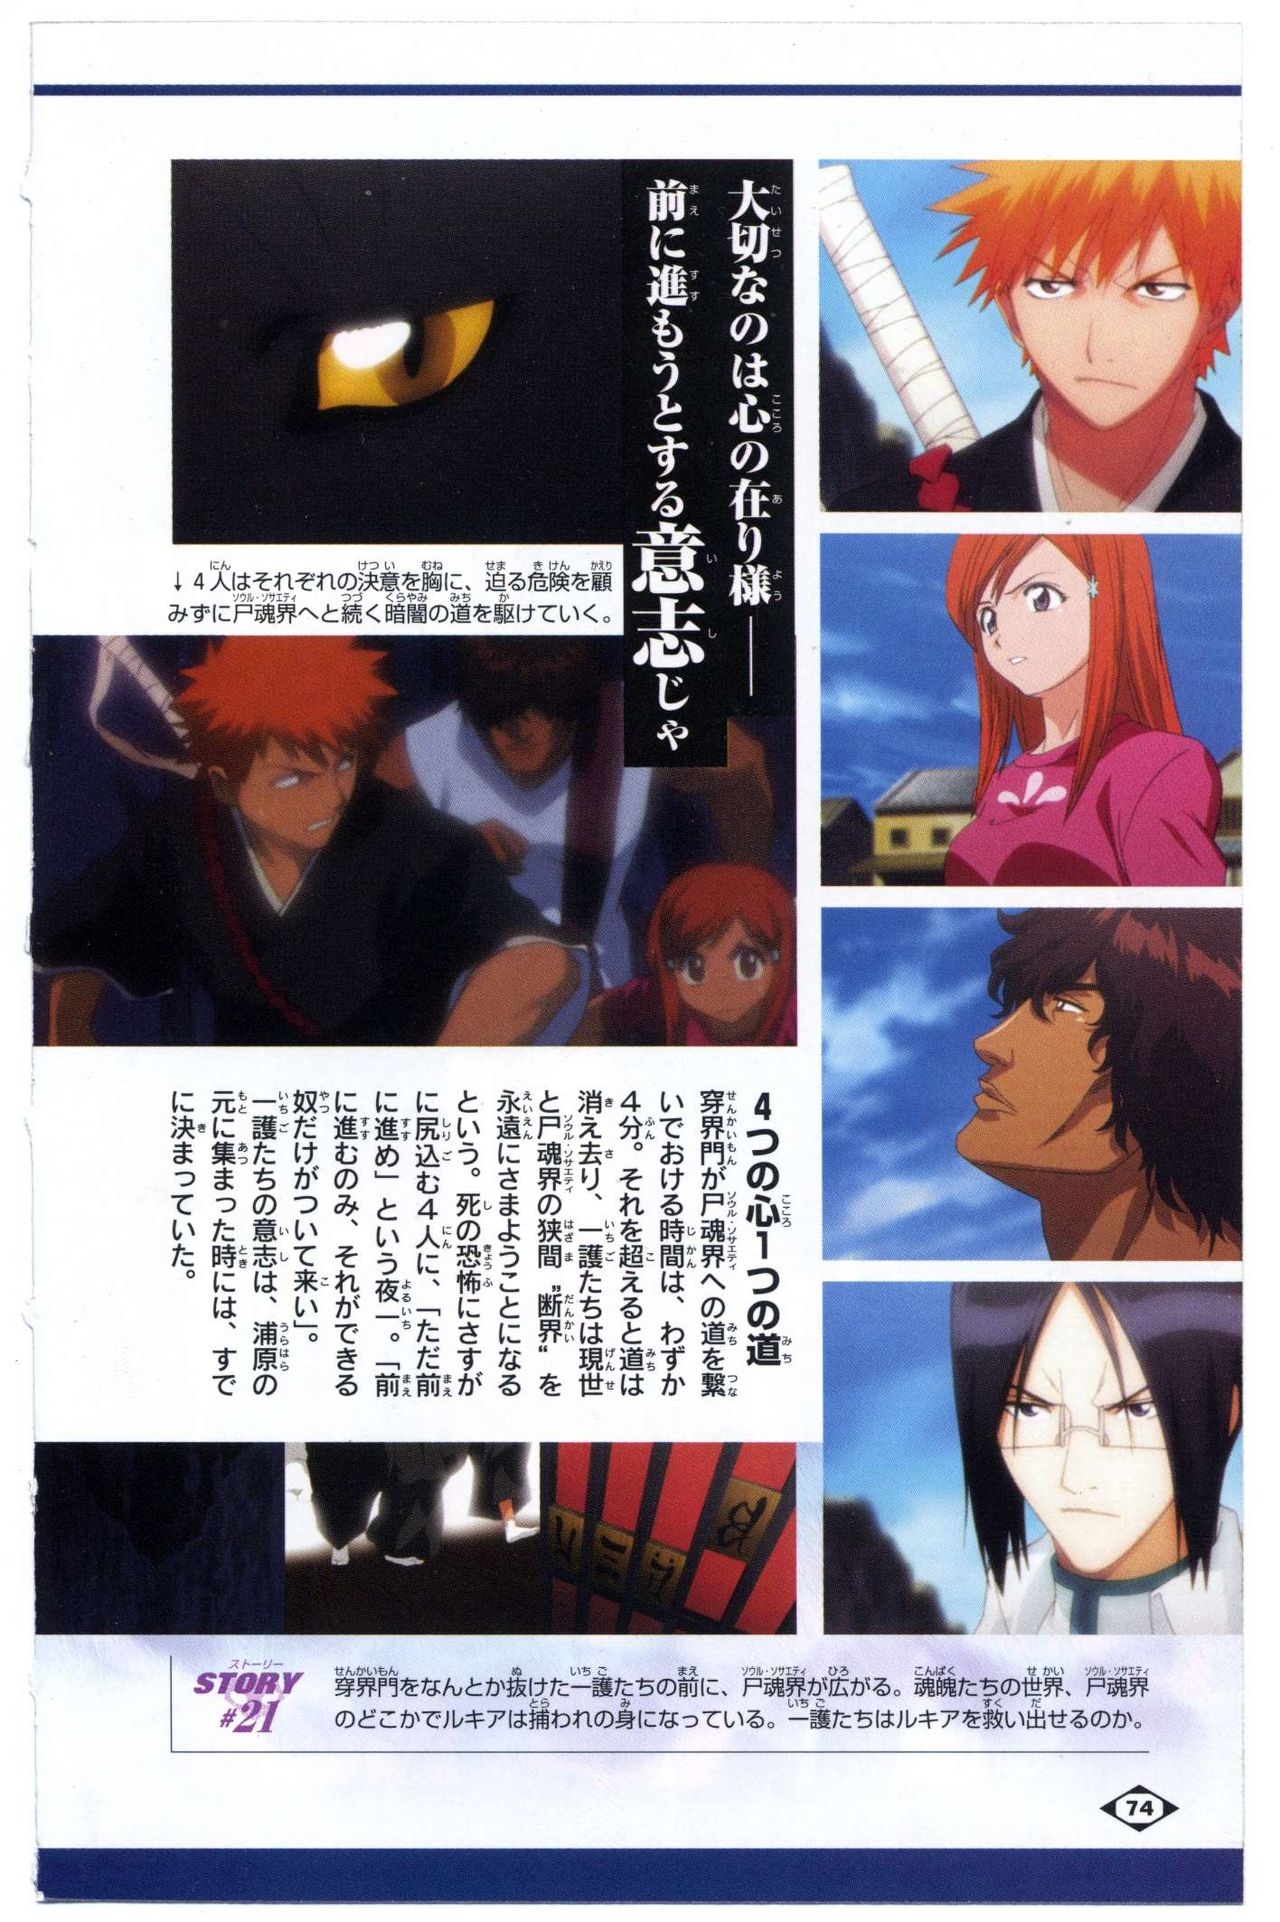 Bleach: Official Animation Book VIBEs 74